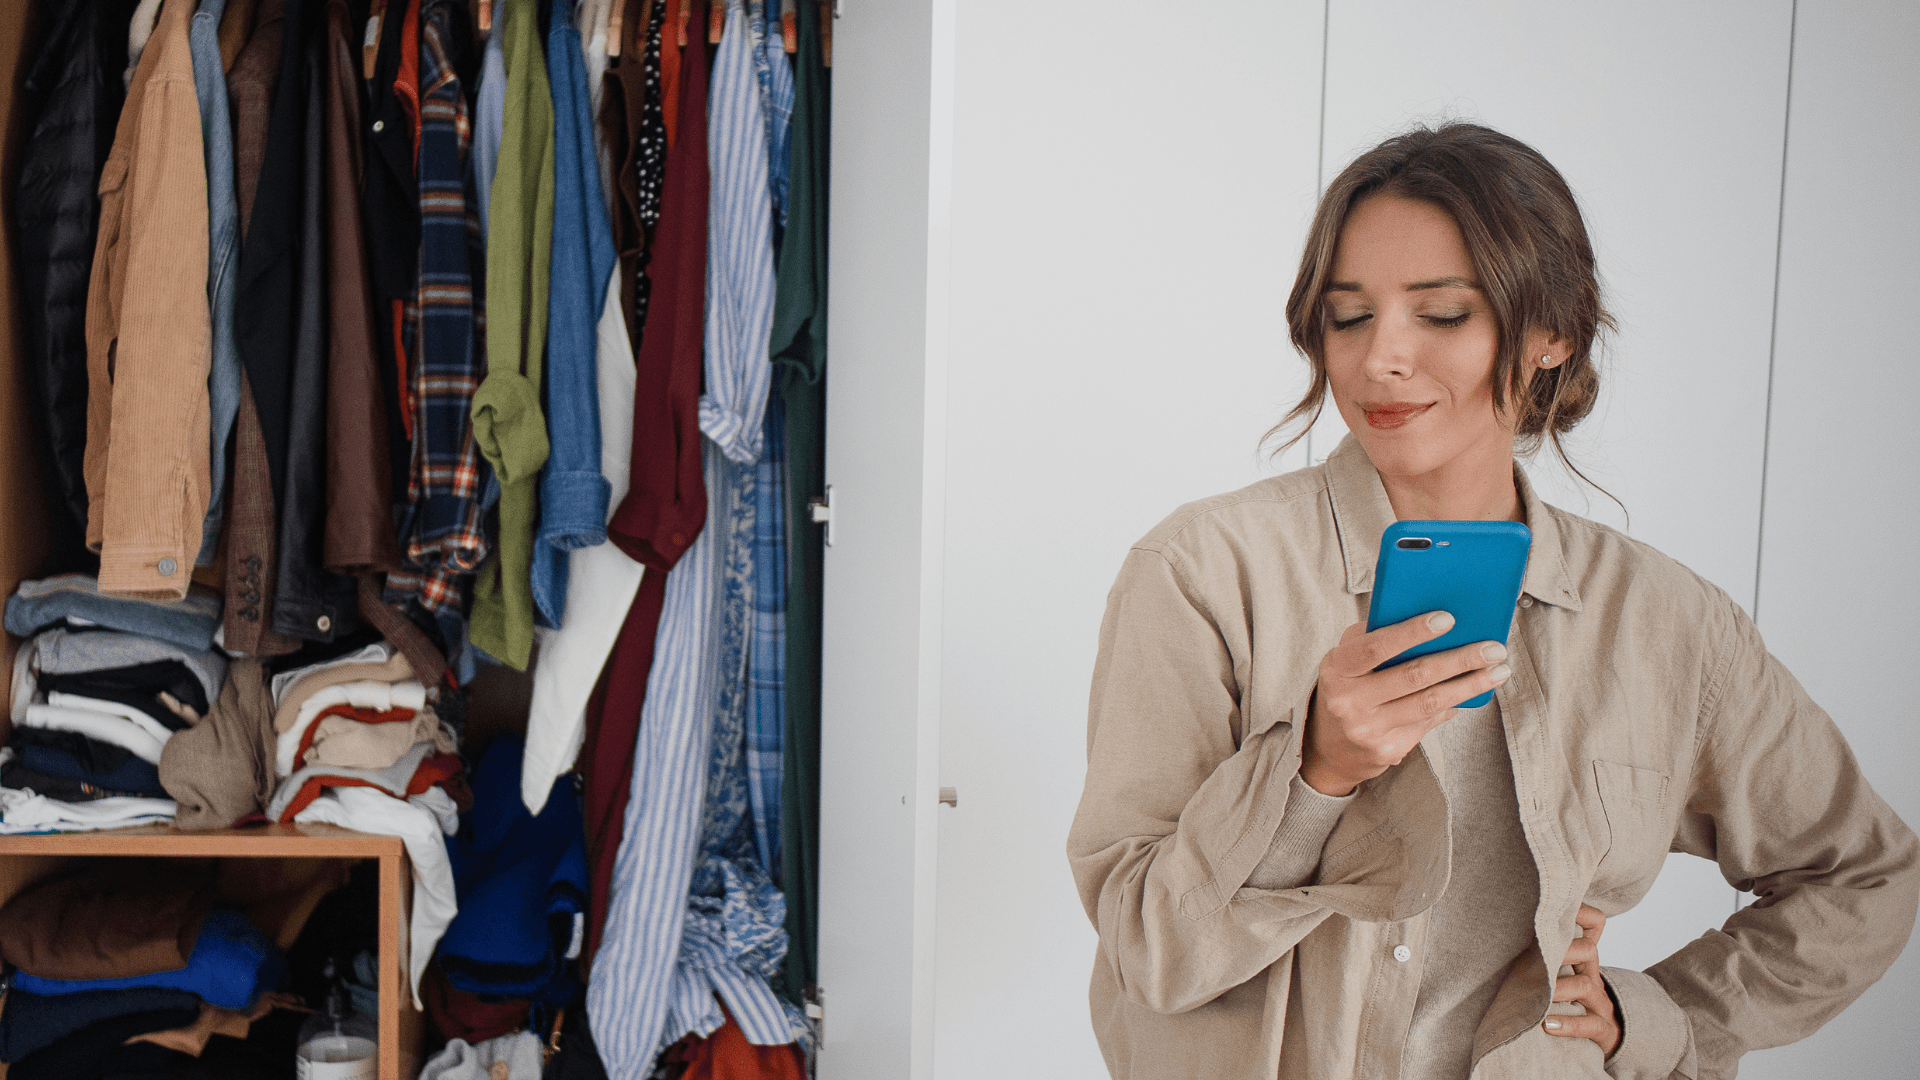 How To Sell Clothes Online For Cash